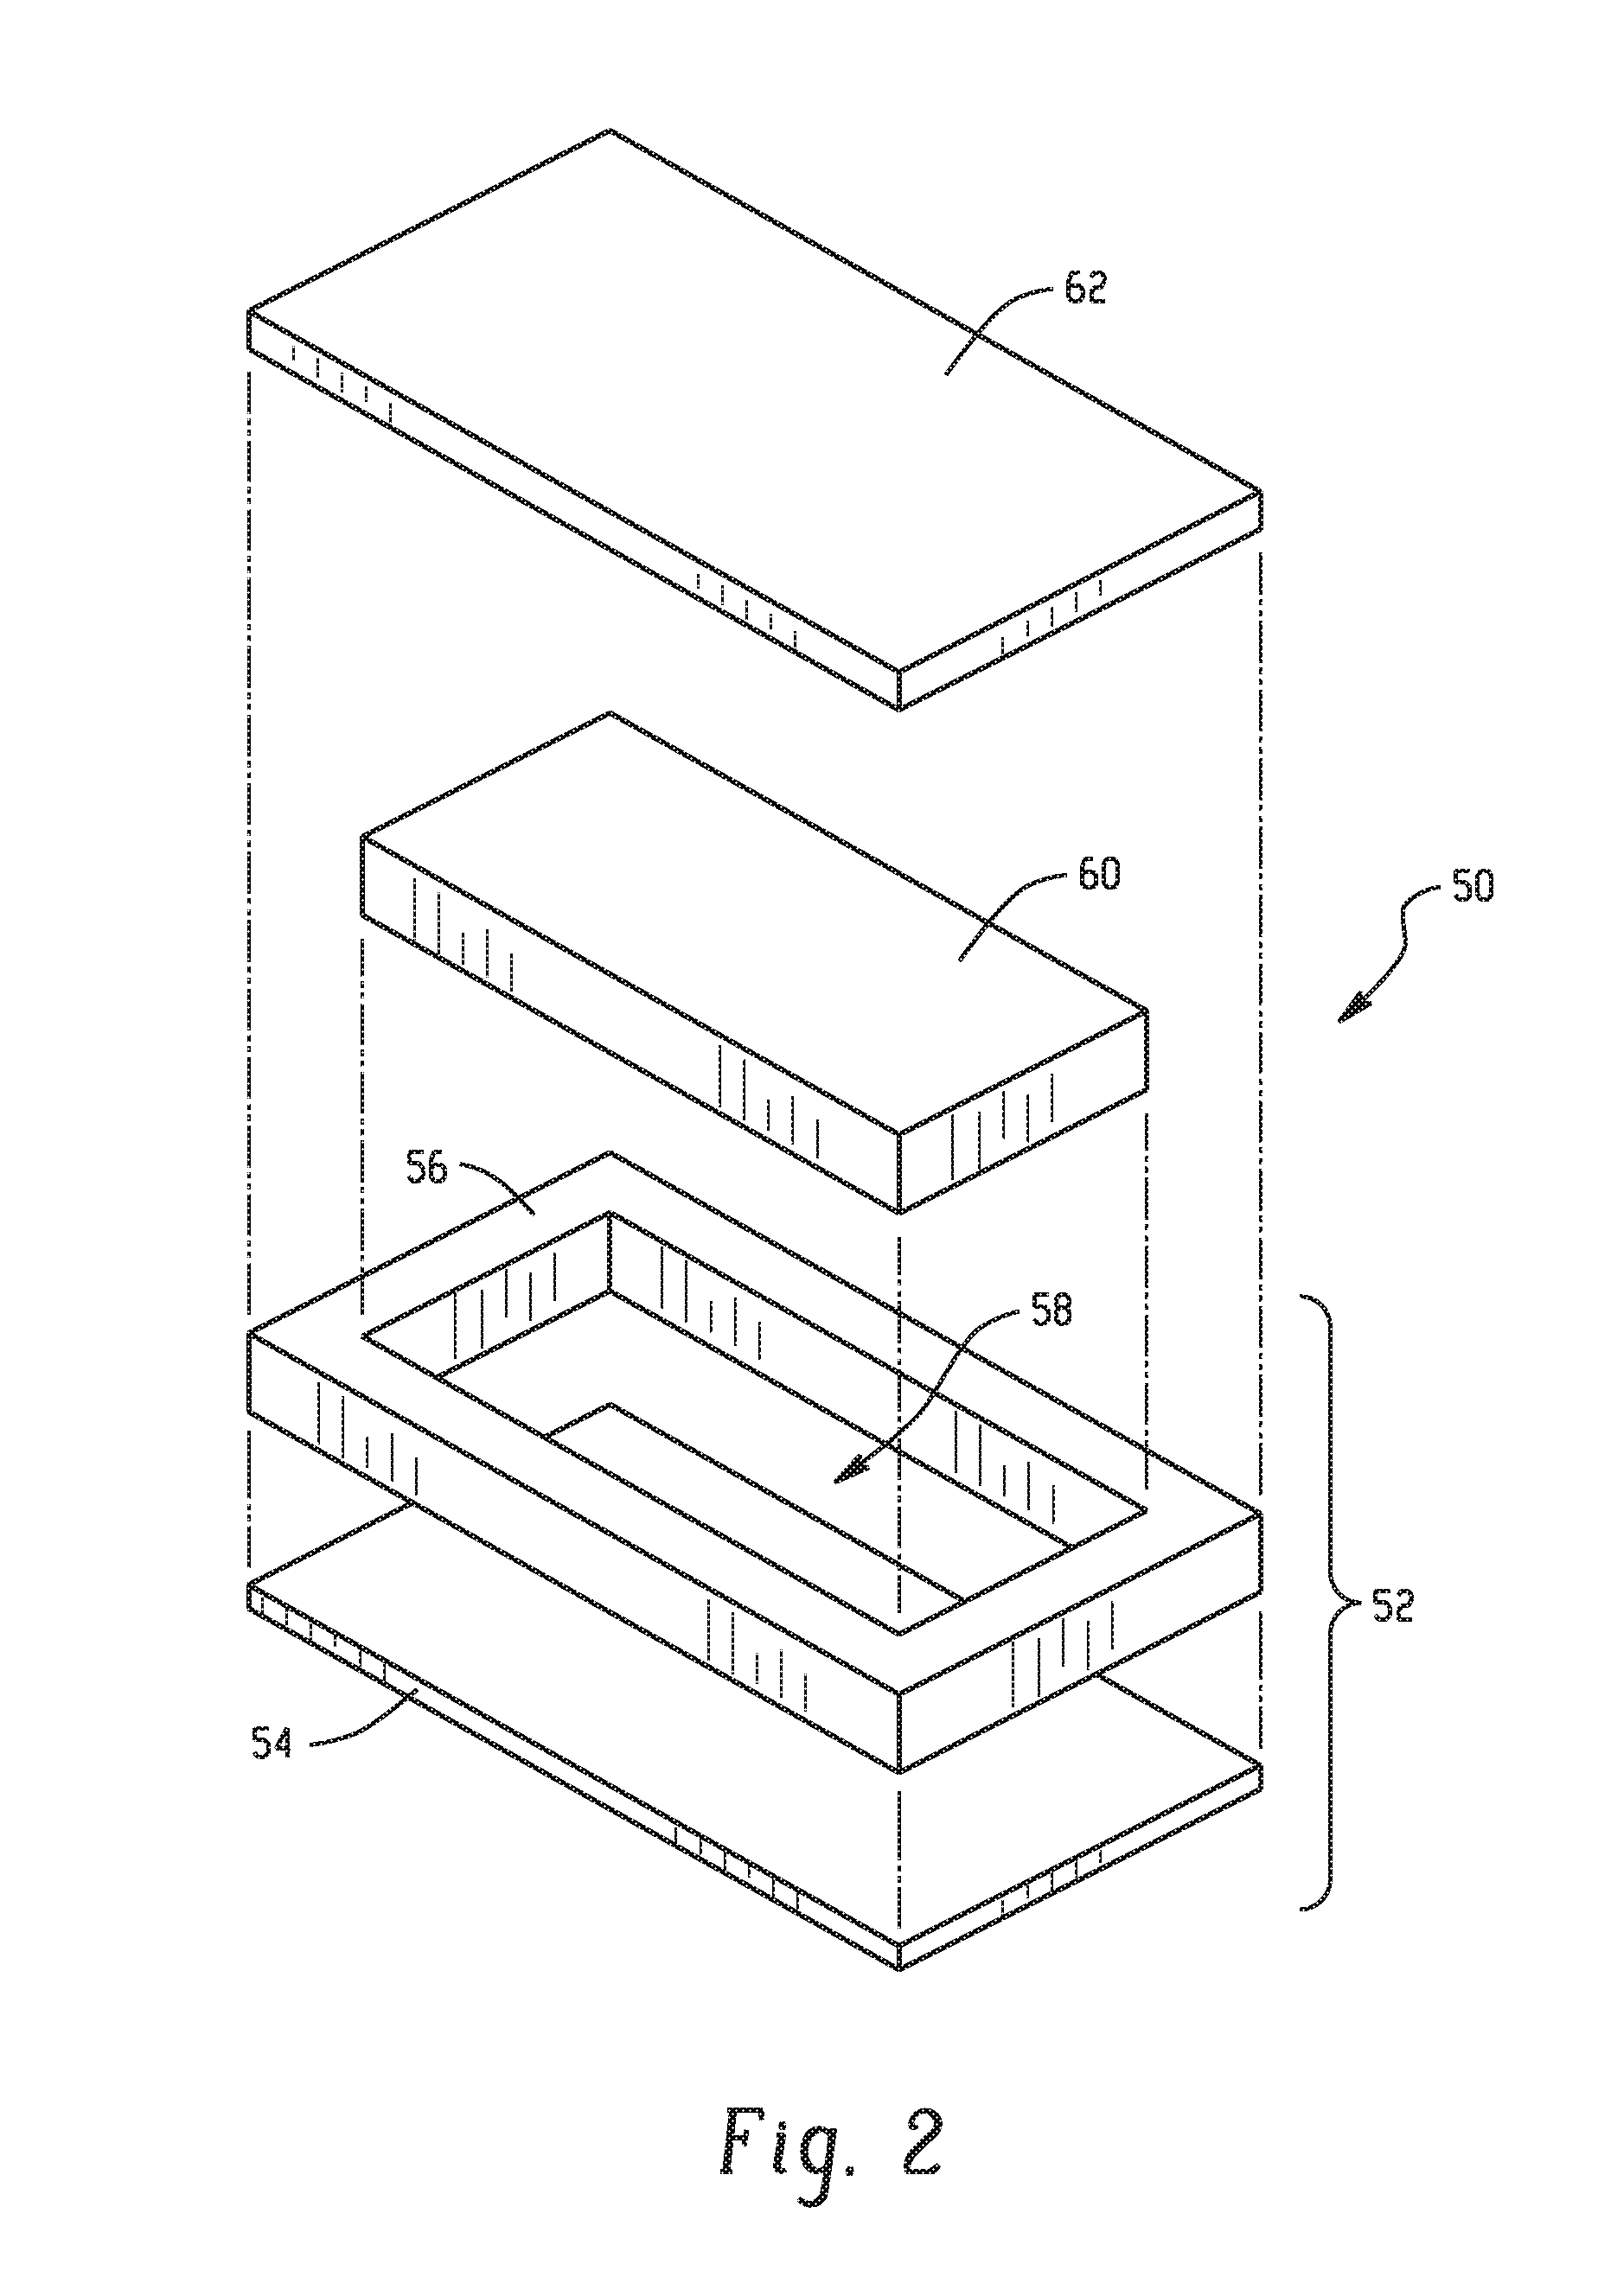 Automated mattress manufacturing process and apparatus